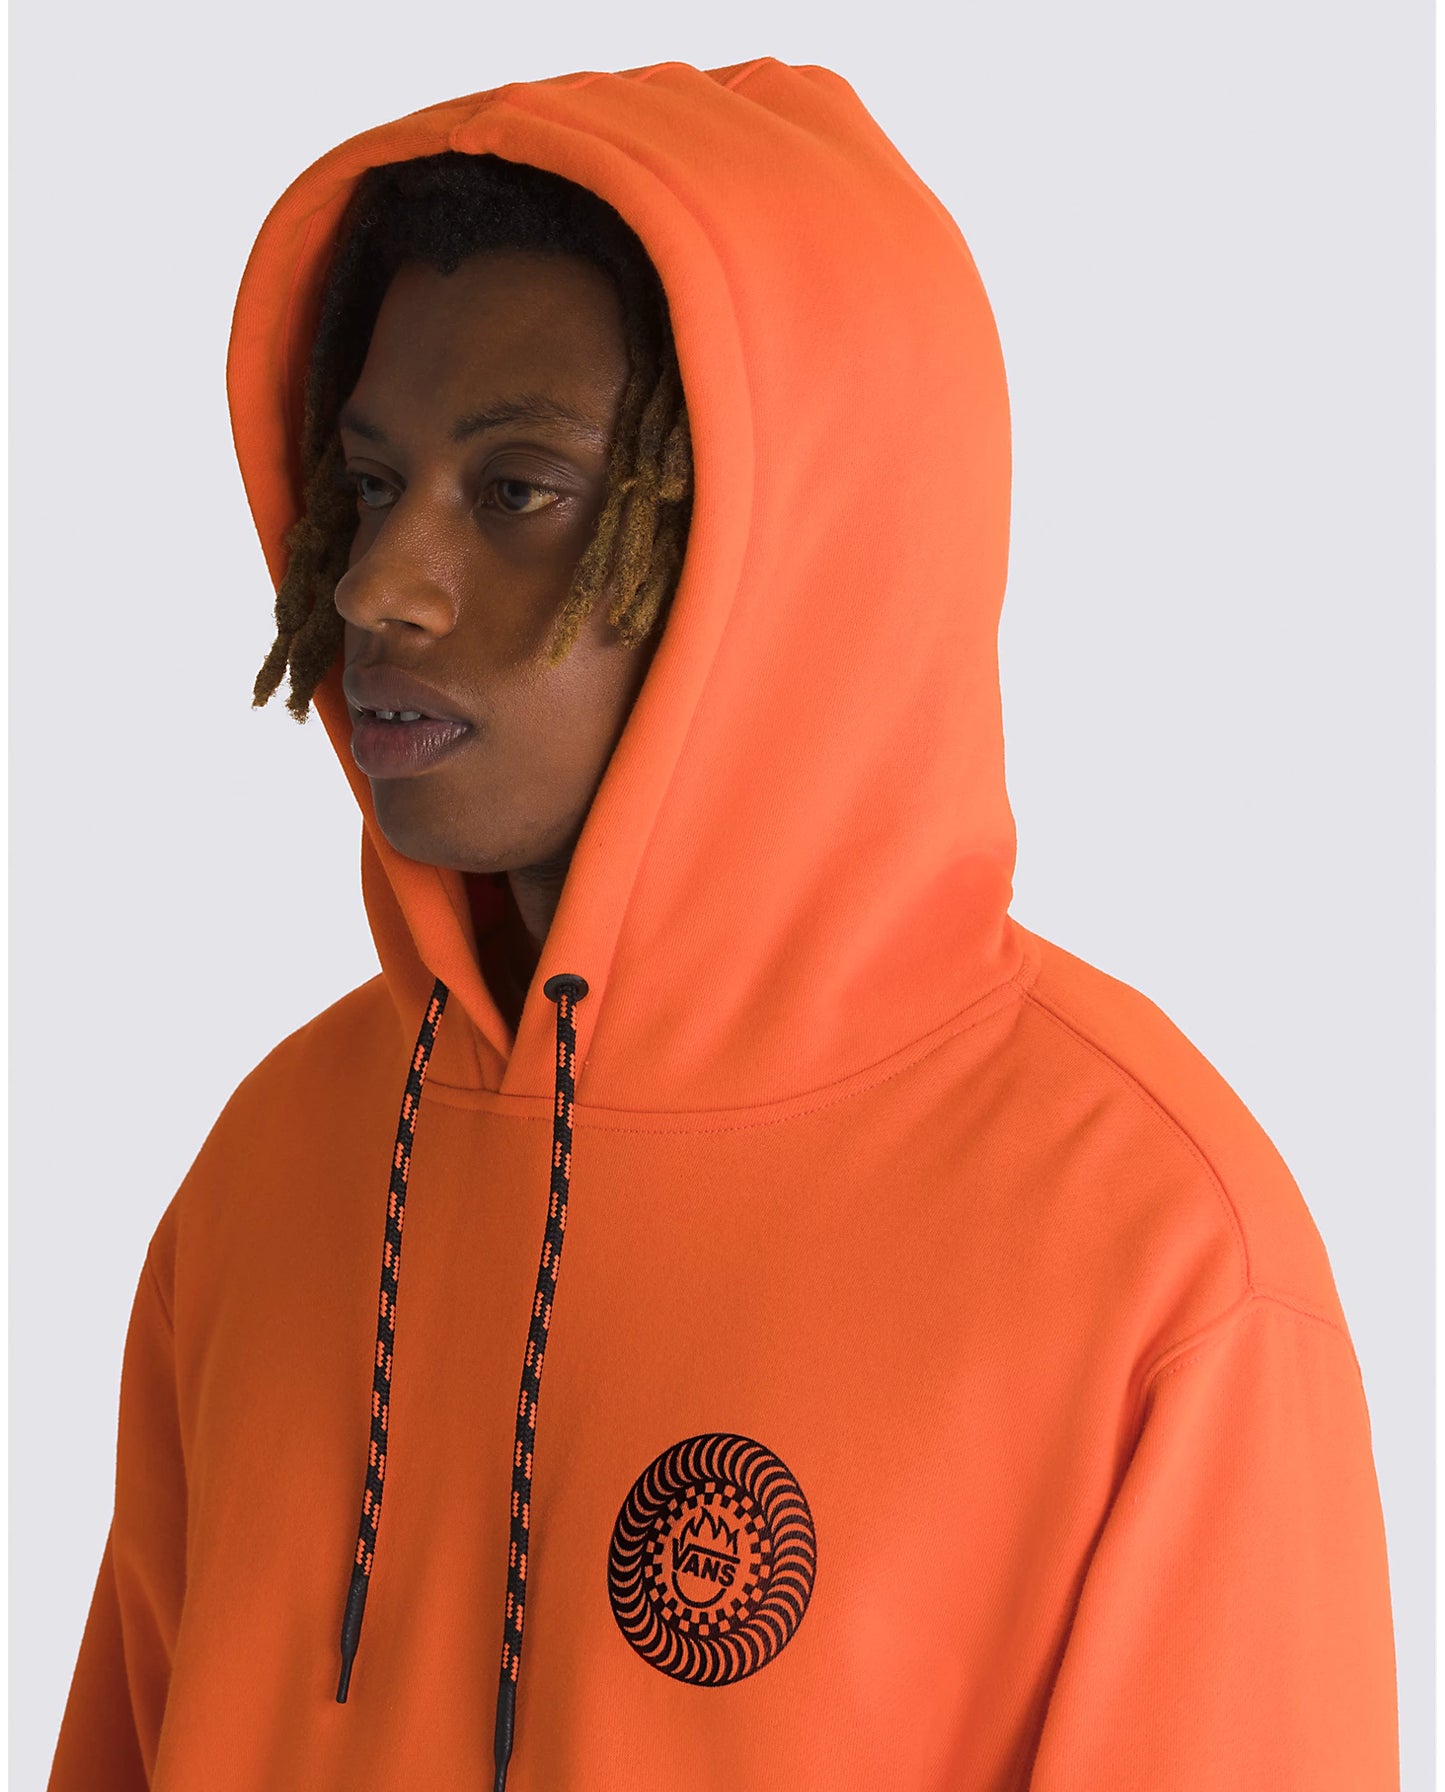 Vans X Spitfire Wheels Pullover Hoodie Flm(size options listed)